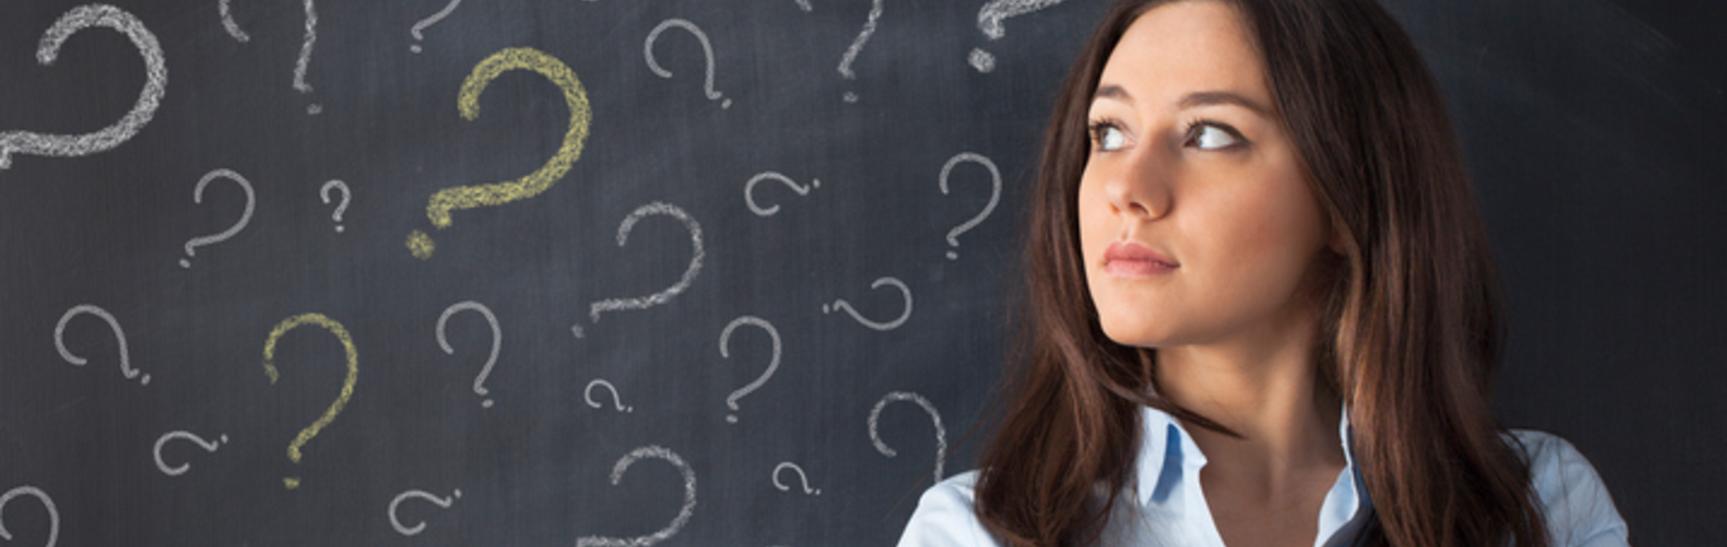 Thinking business woman in front of question marks drawn on blackboard